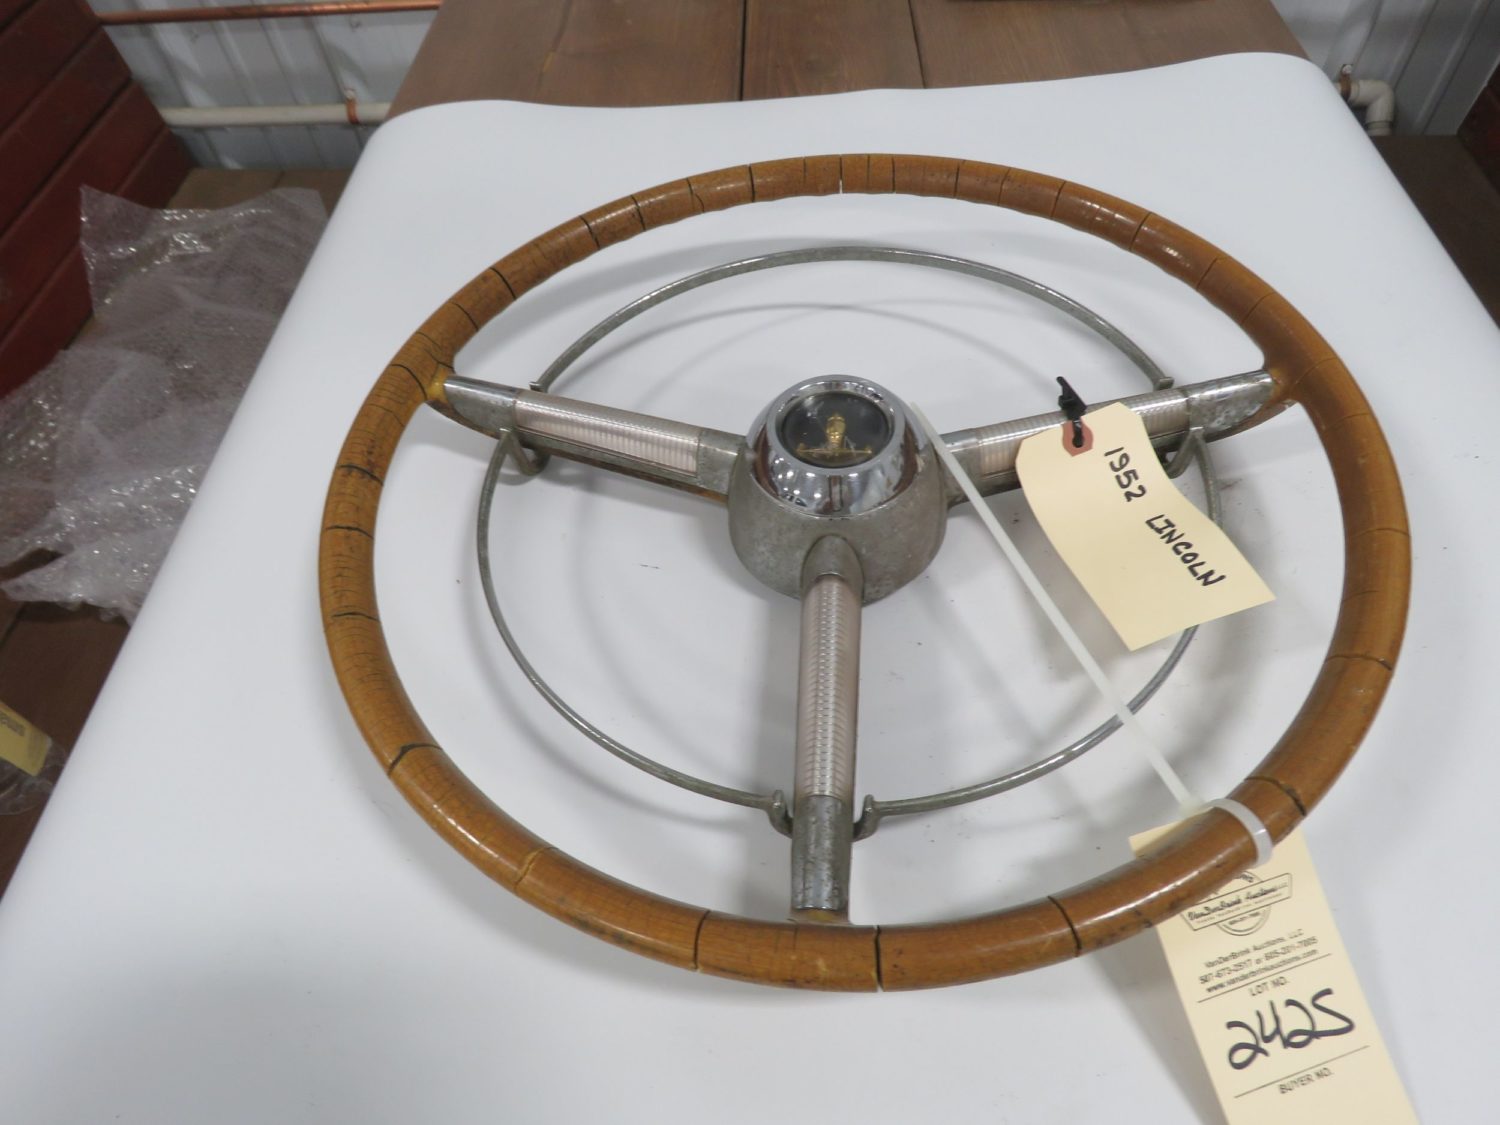 1952 Lincoln Original Steering wheel with horn ring - Image 1